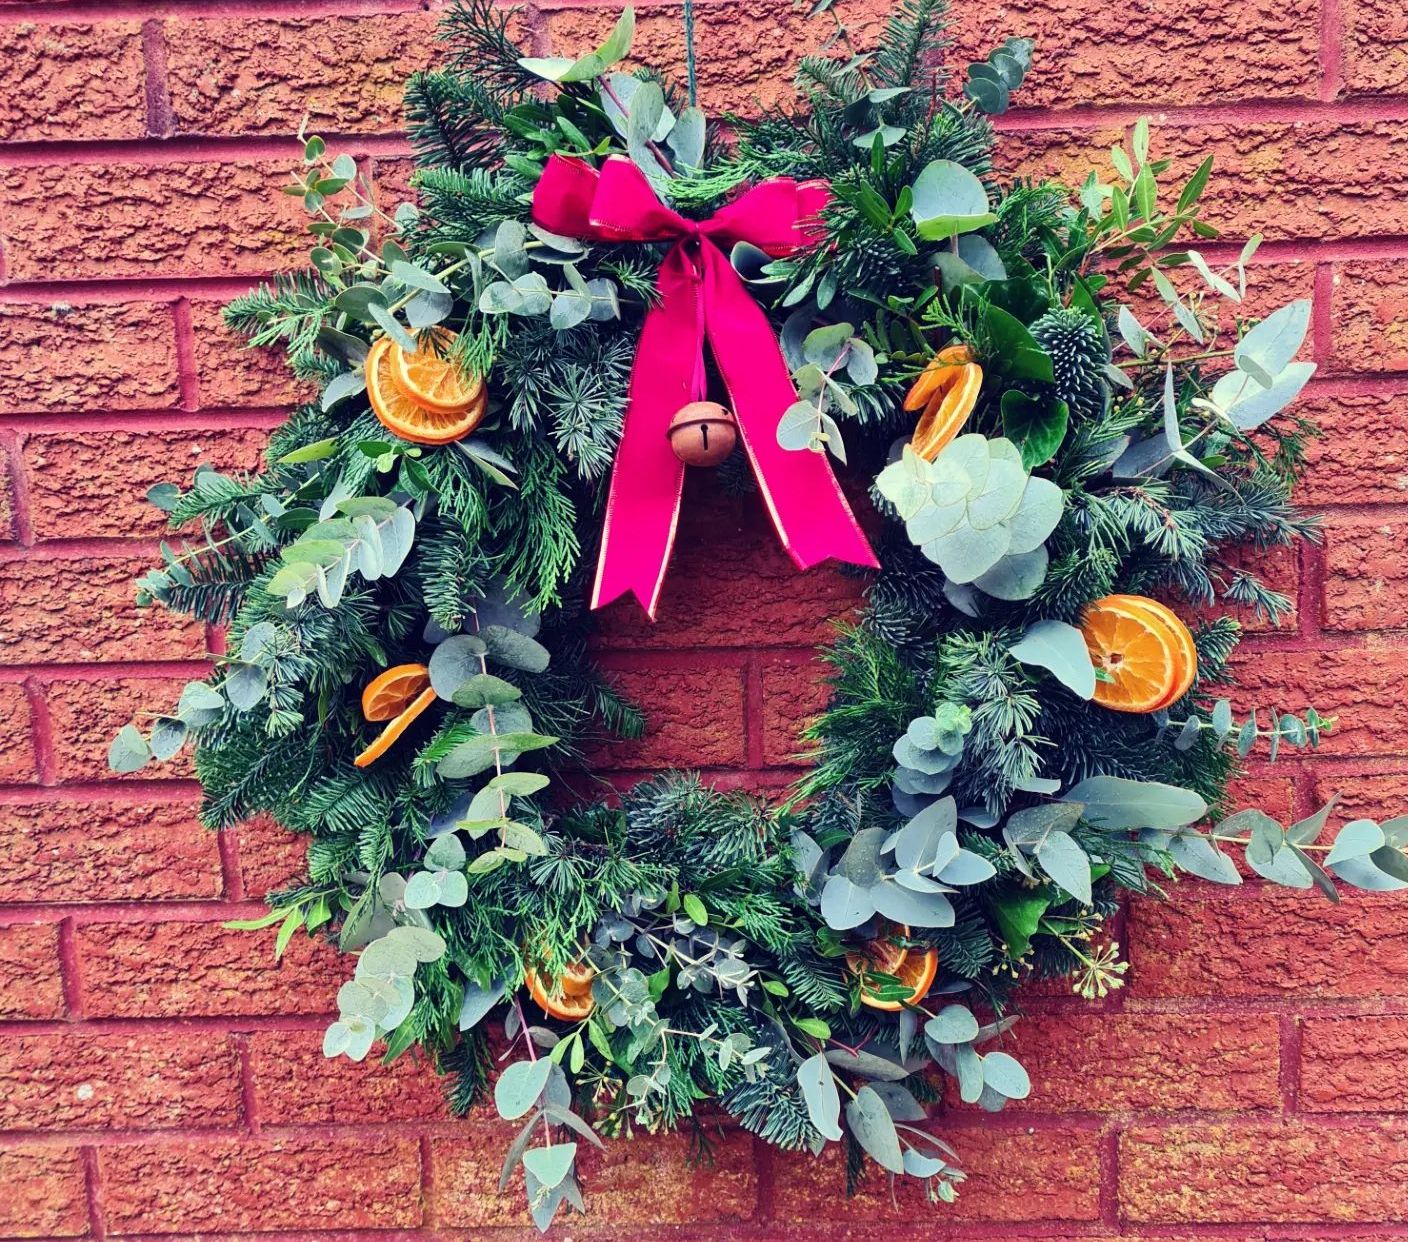 Special Christmas Wreath Making events are taking place at Southport Market